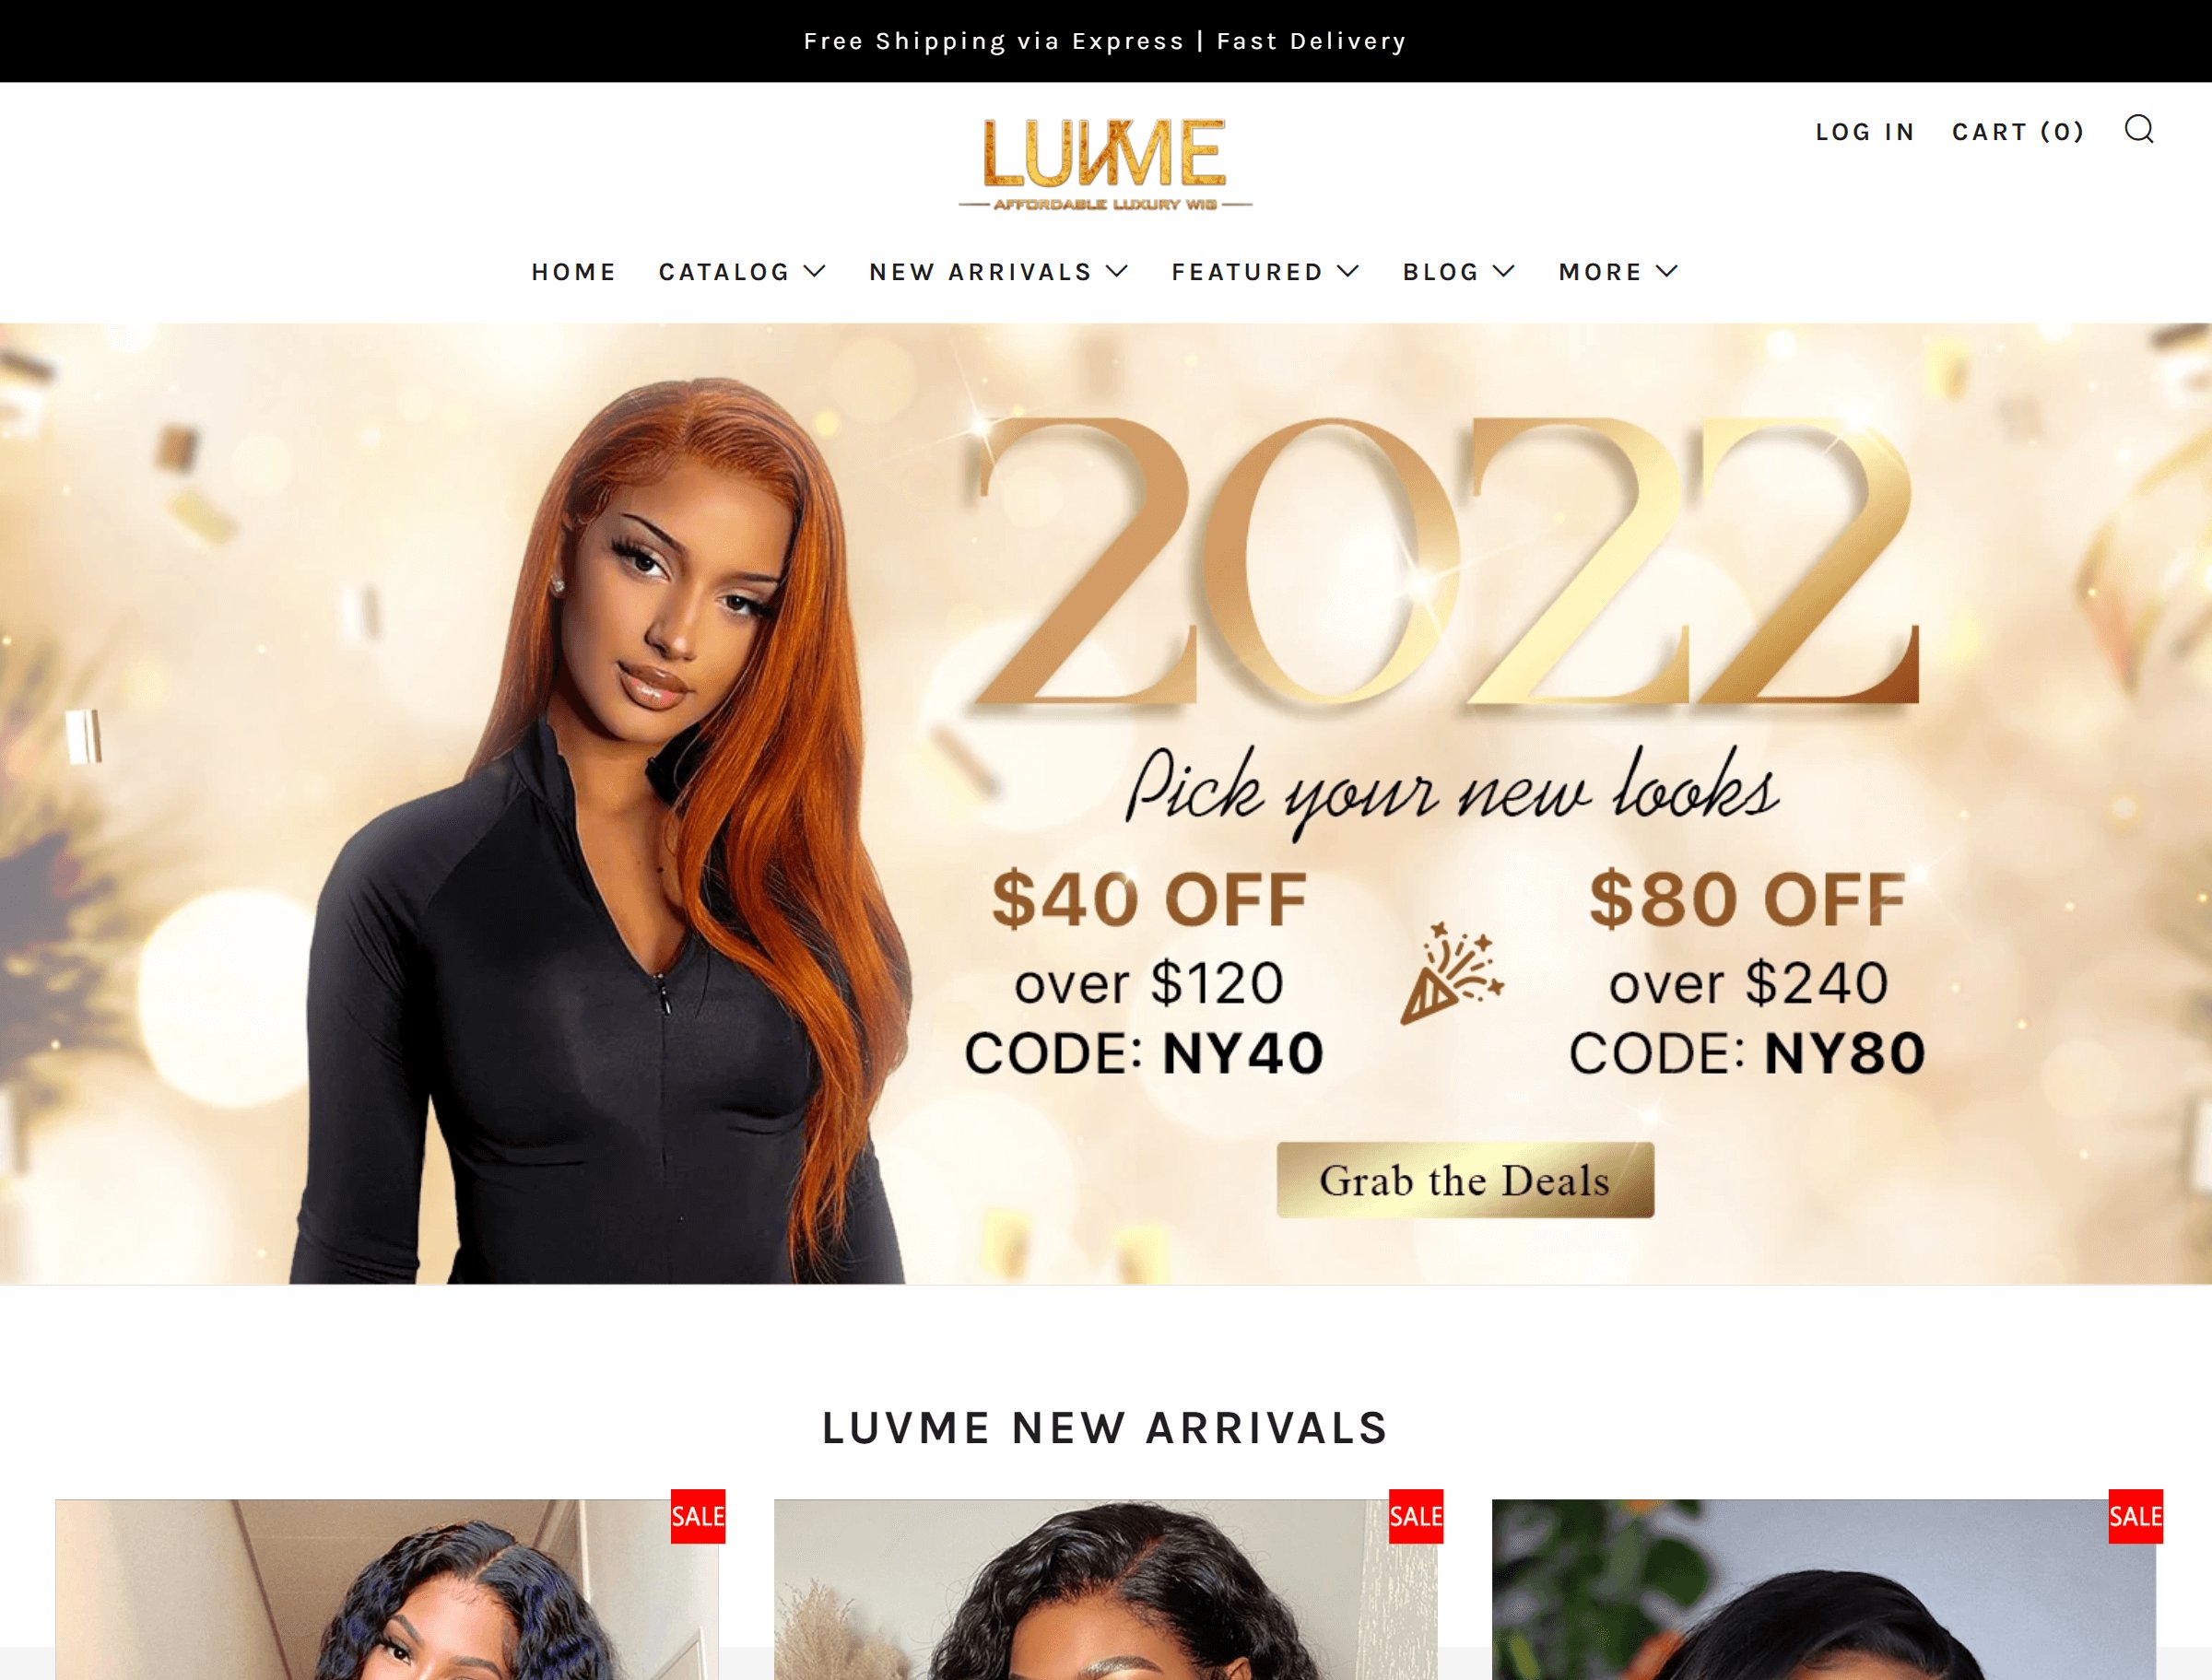 Luvme Hair on ReadSomeReviews